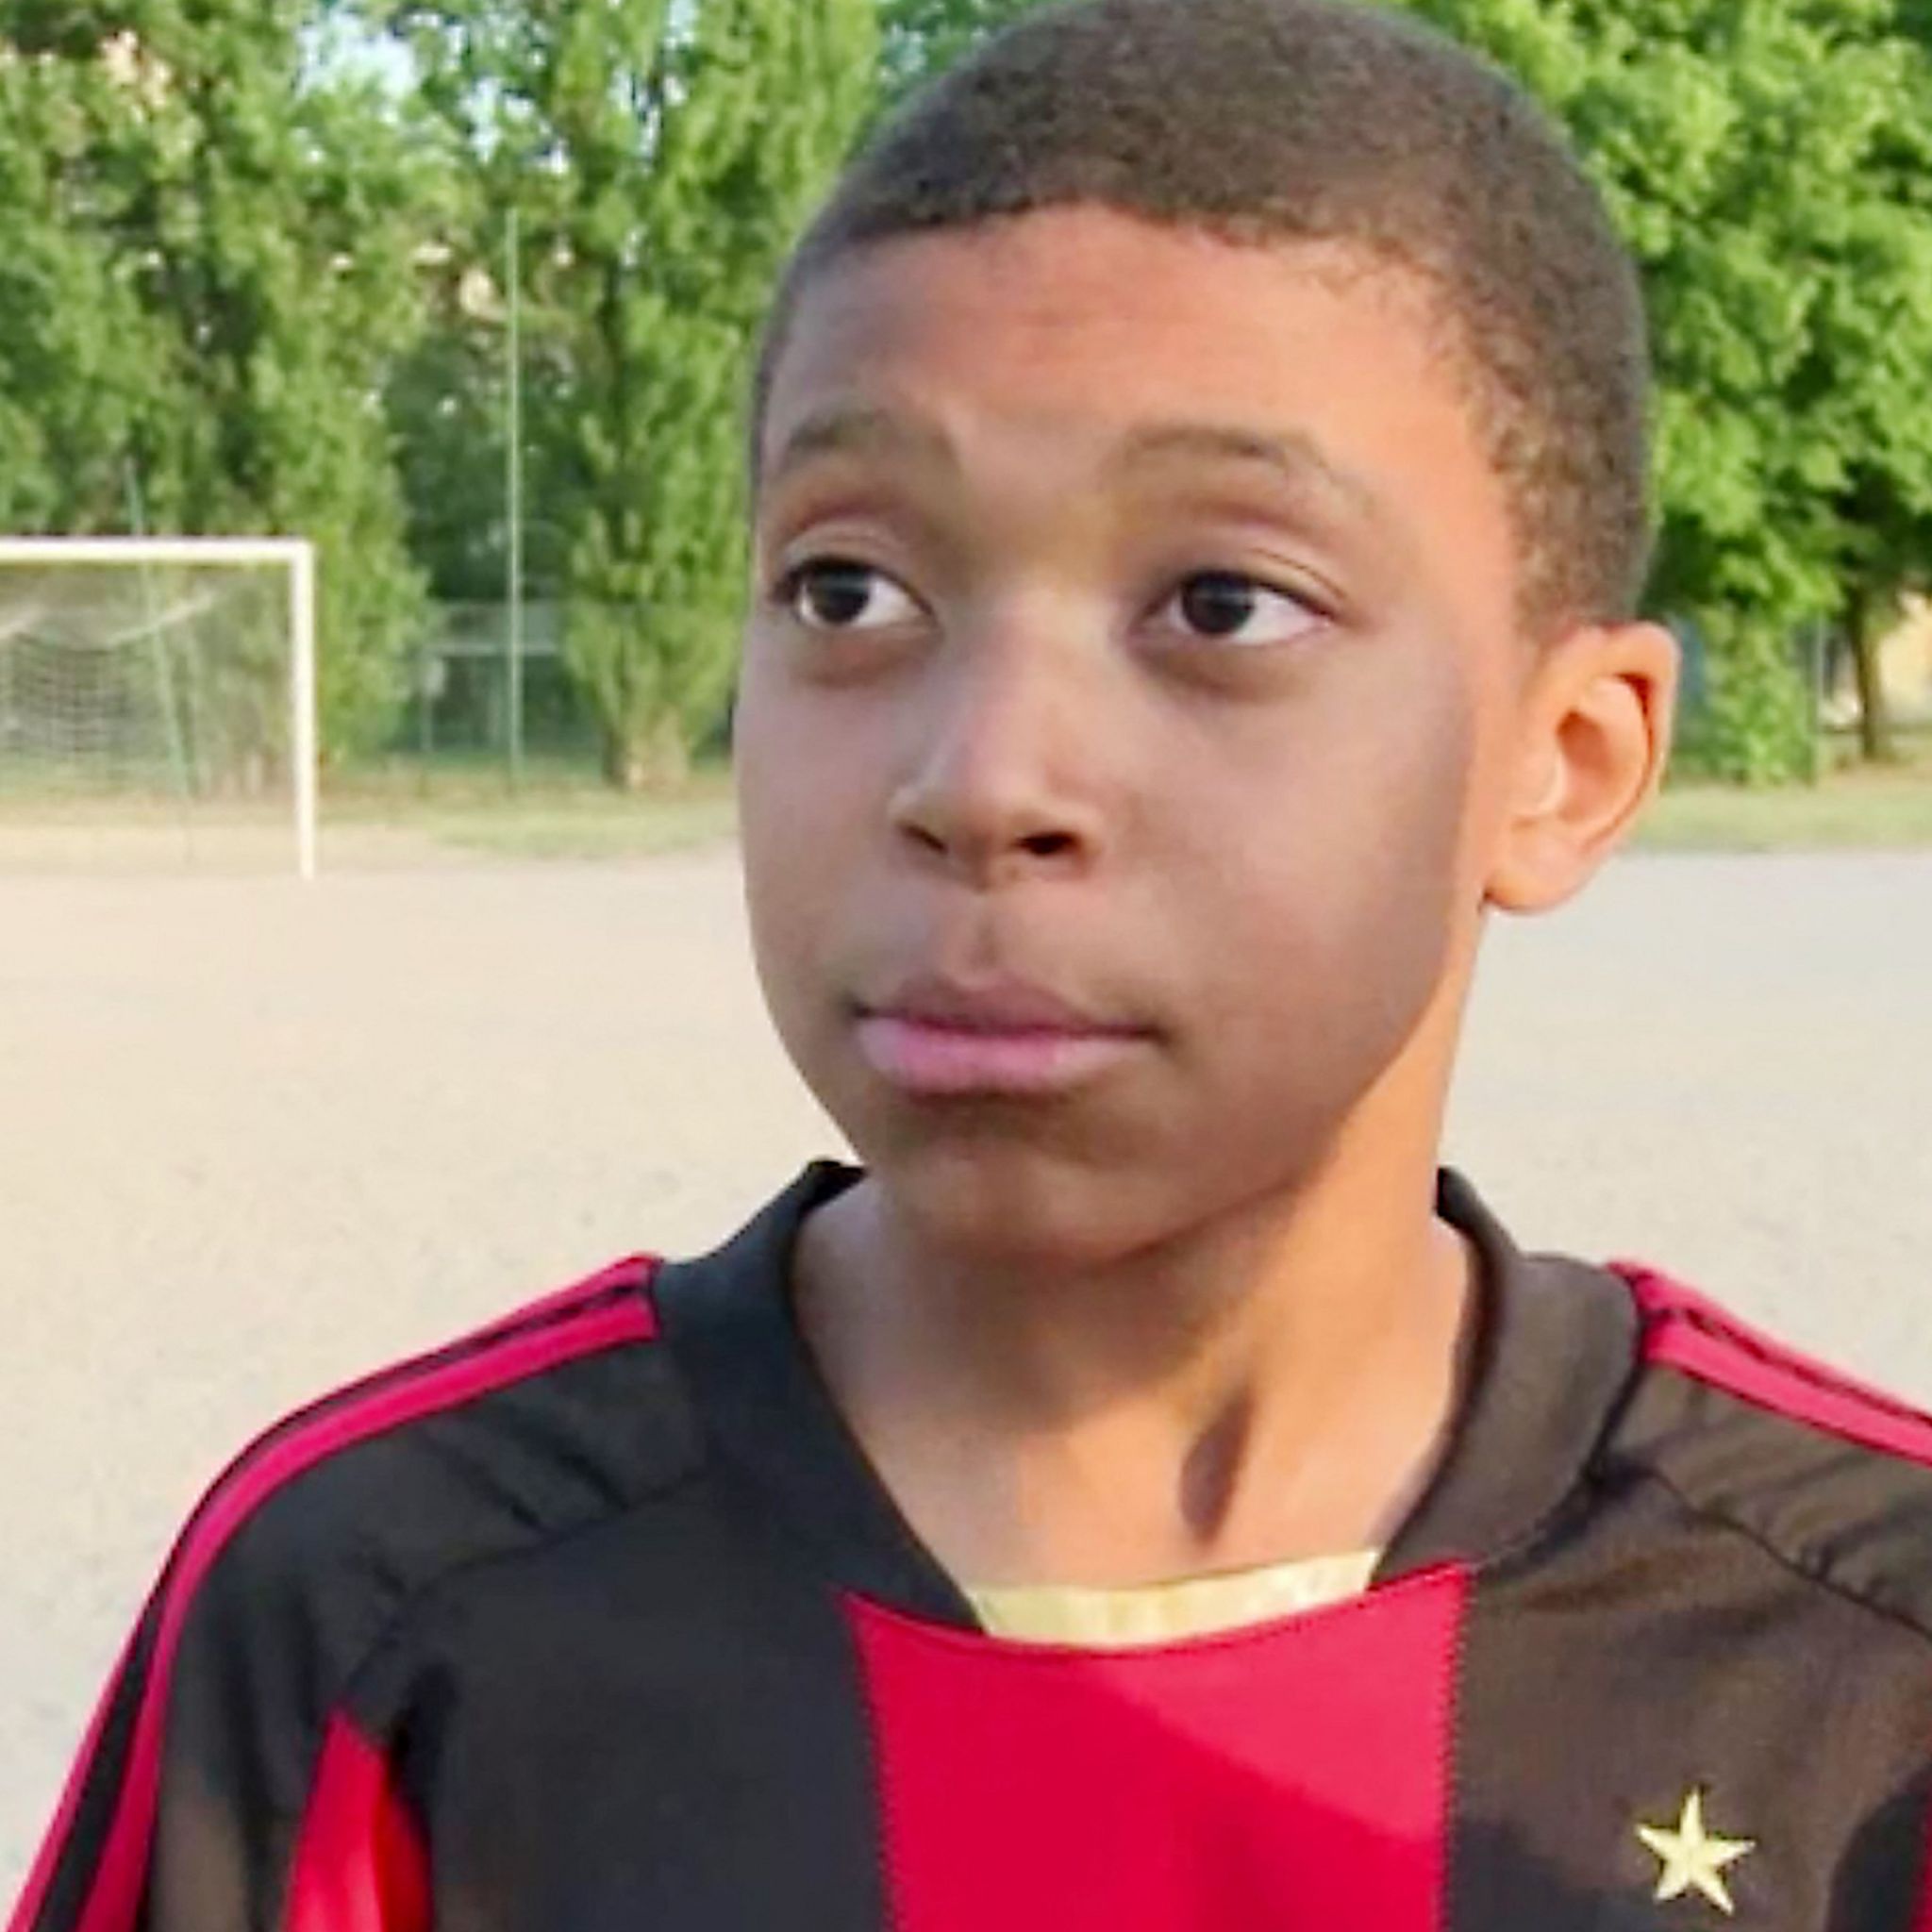 A 12-year-old Kylian Mbappe in an AC Milan shirt